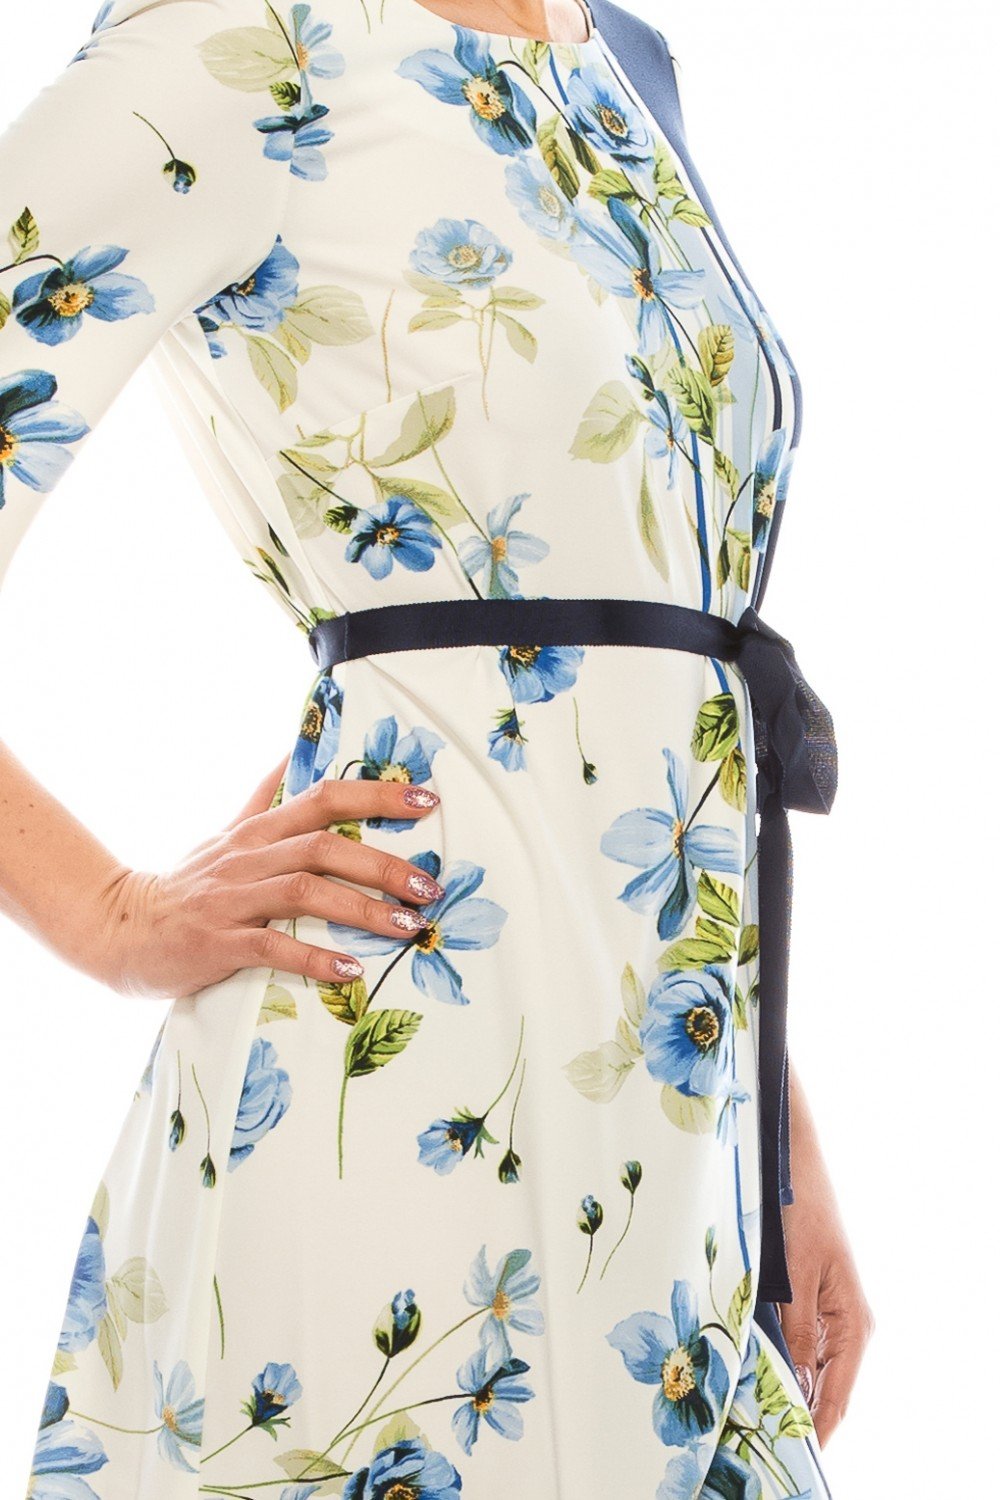 Gabby Skye - 19445M Quarter Length Sleeve Floral Dress In White and Blue